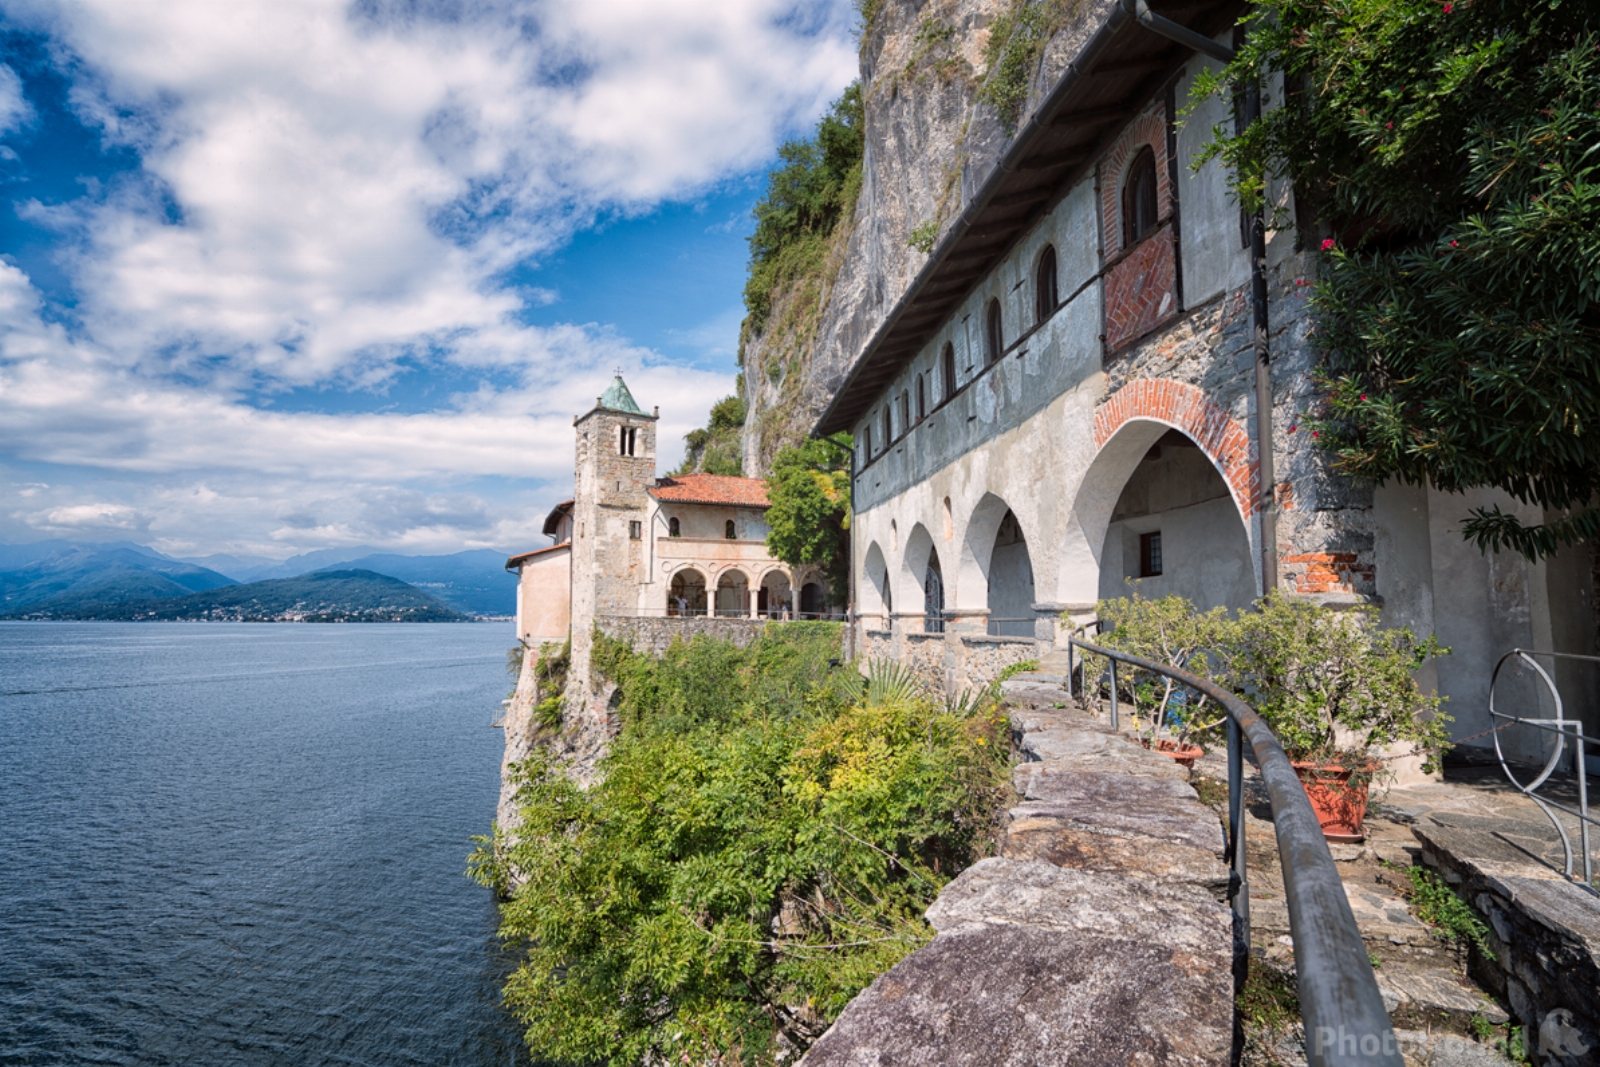 Image of Santa Catarina - the monastery in the cliff by James Billings.